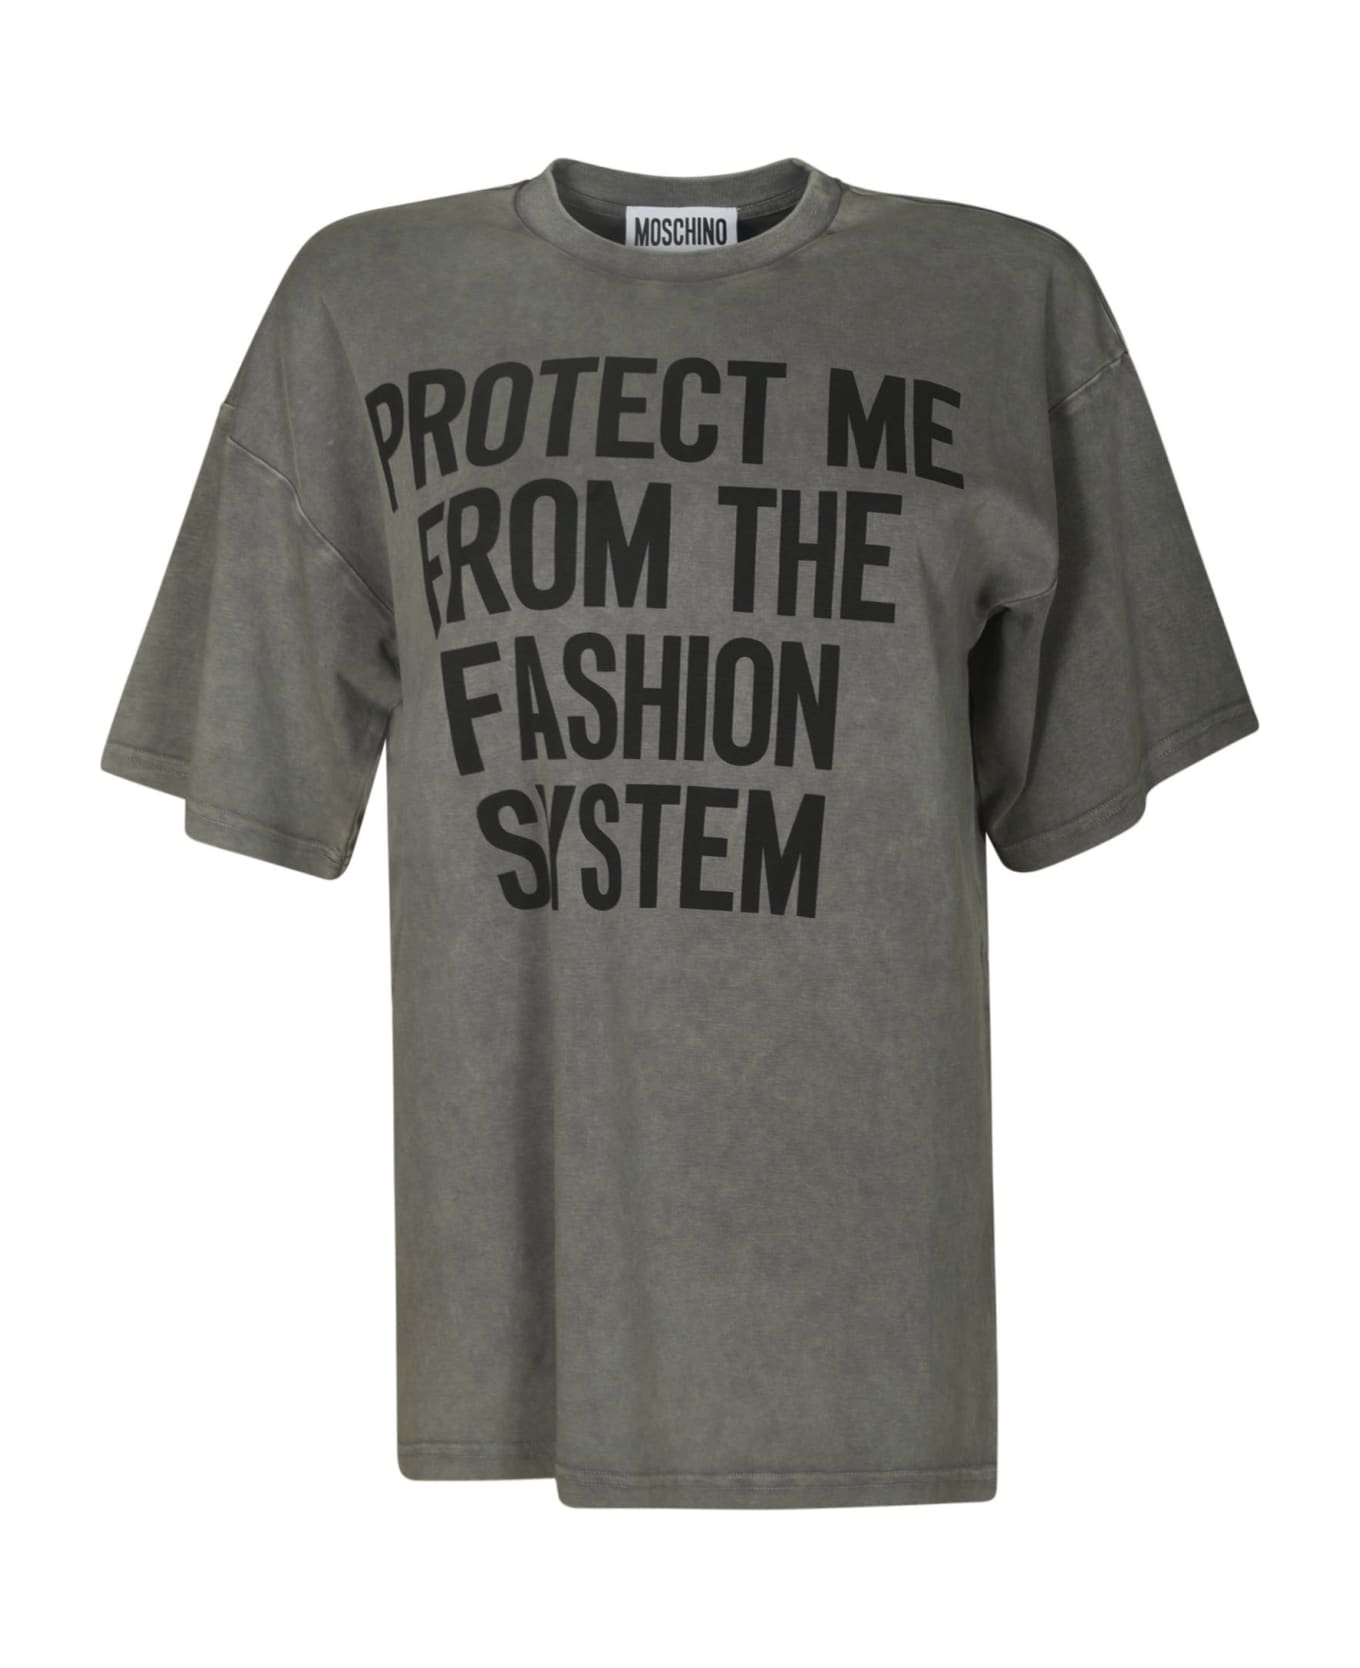 Moschino Protect Me T-shirt - 1888 シャツ